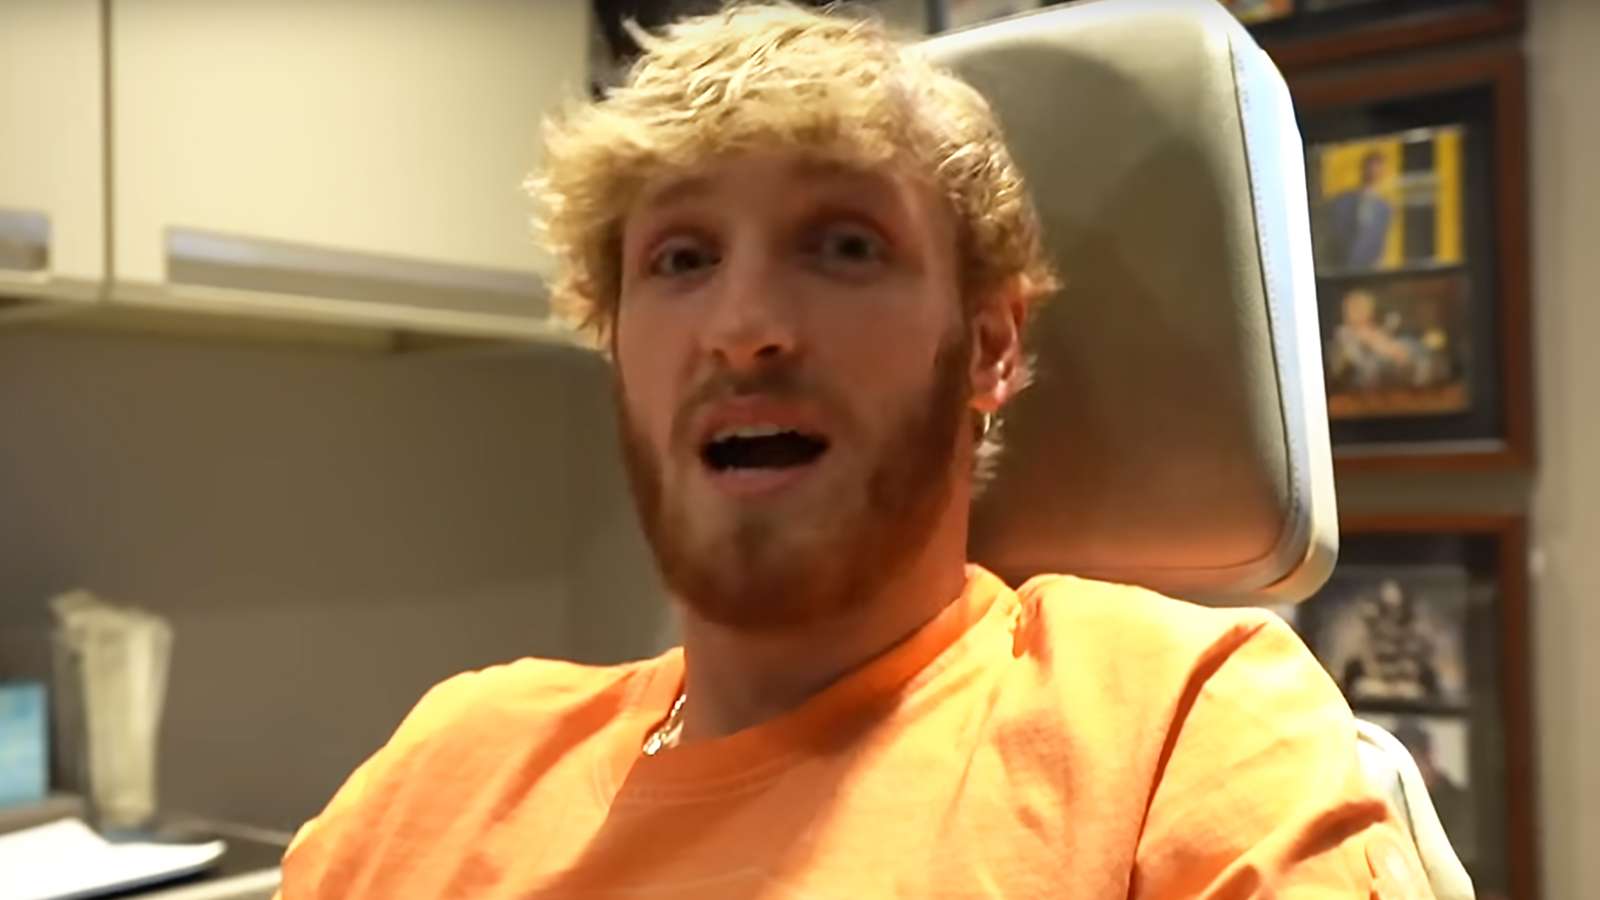 Logan Paul discussing his nose injury in a doctor's office.